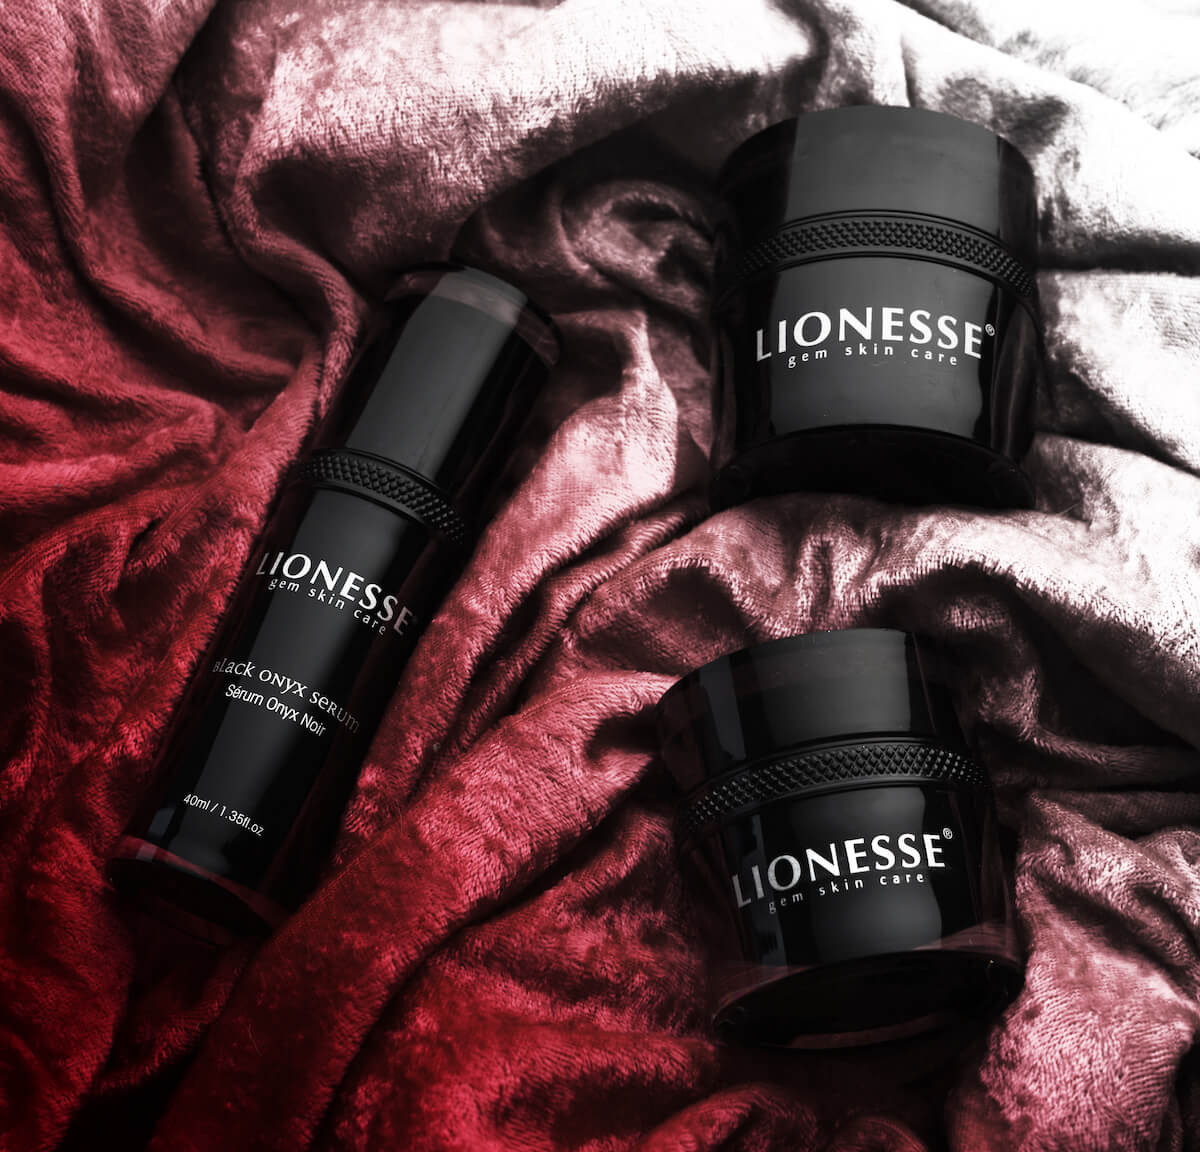 Lionesse-Black-Onyx-collection